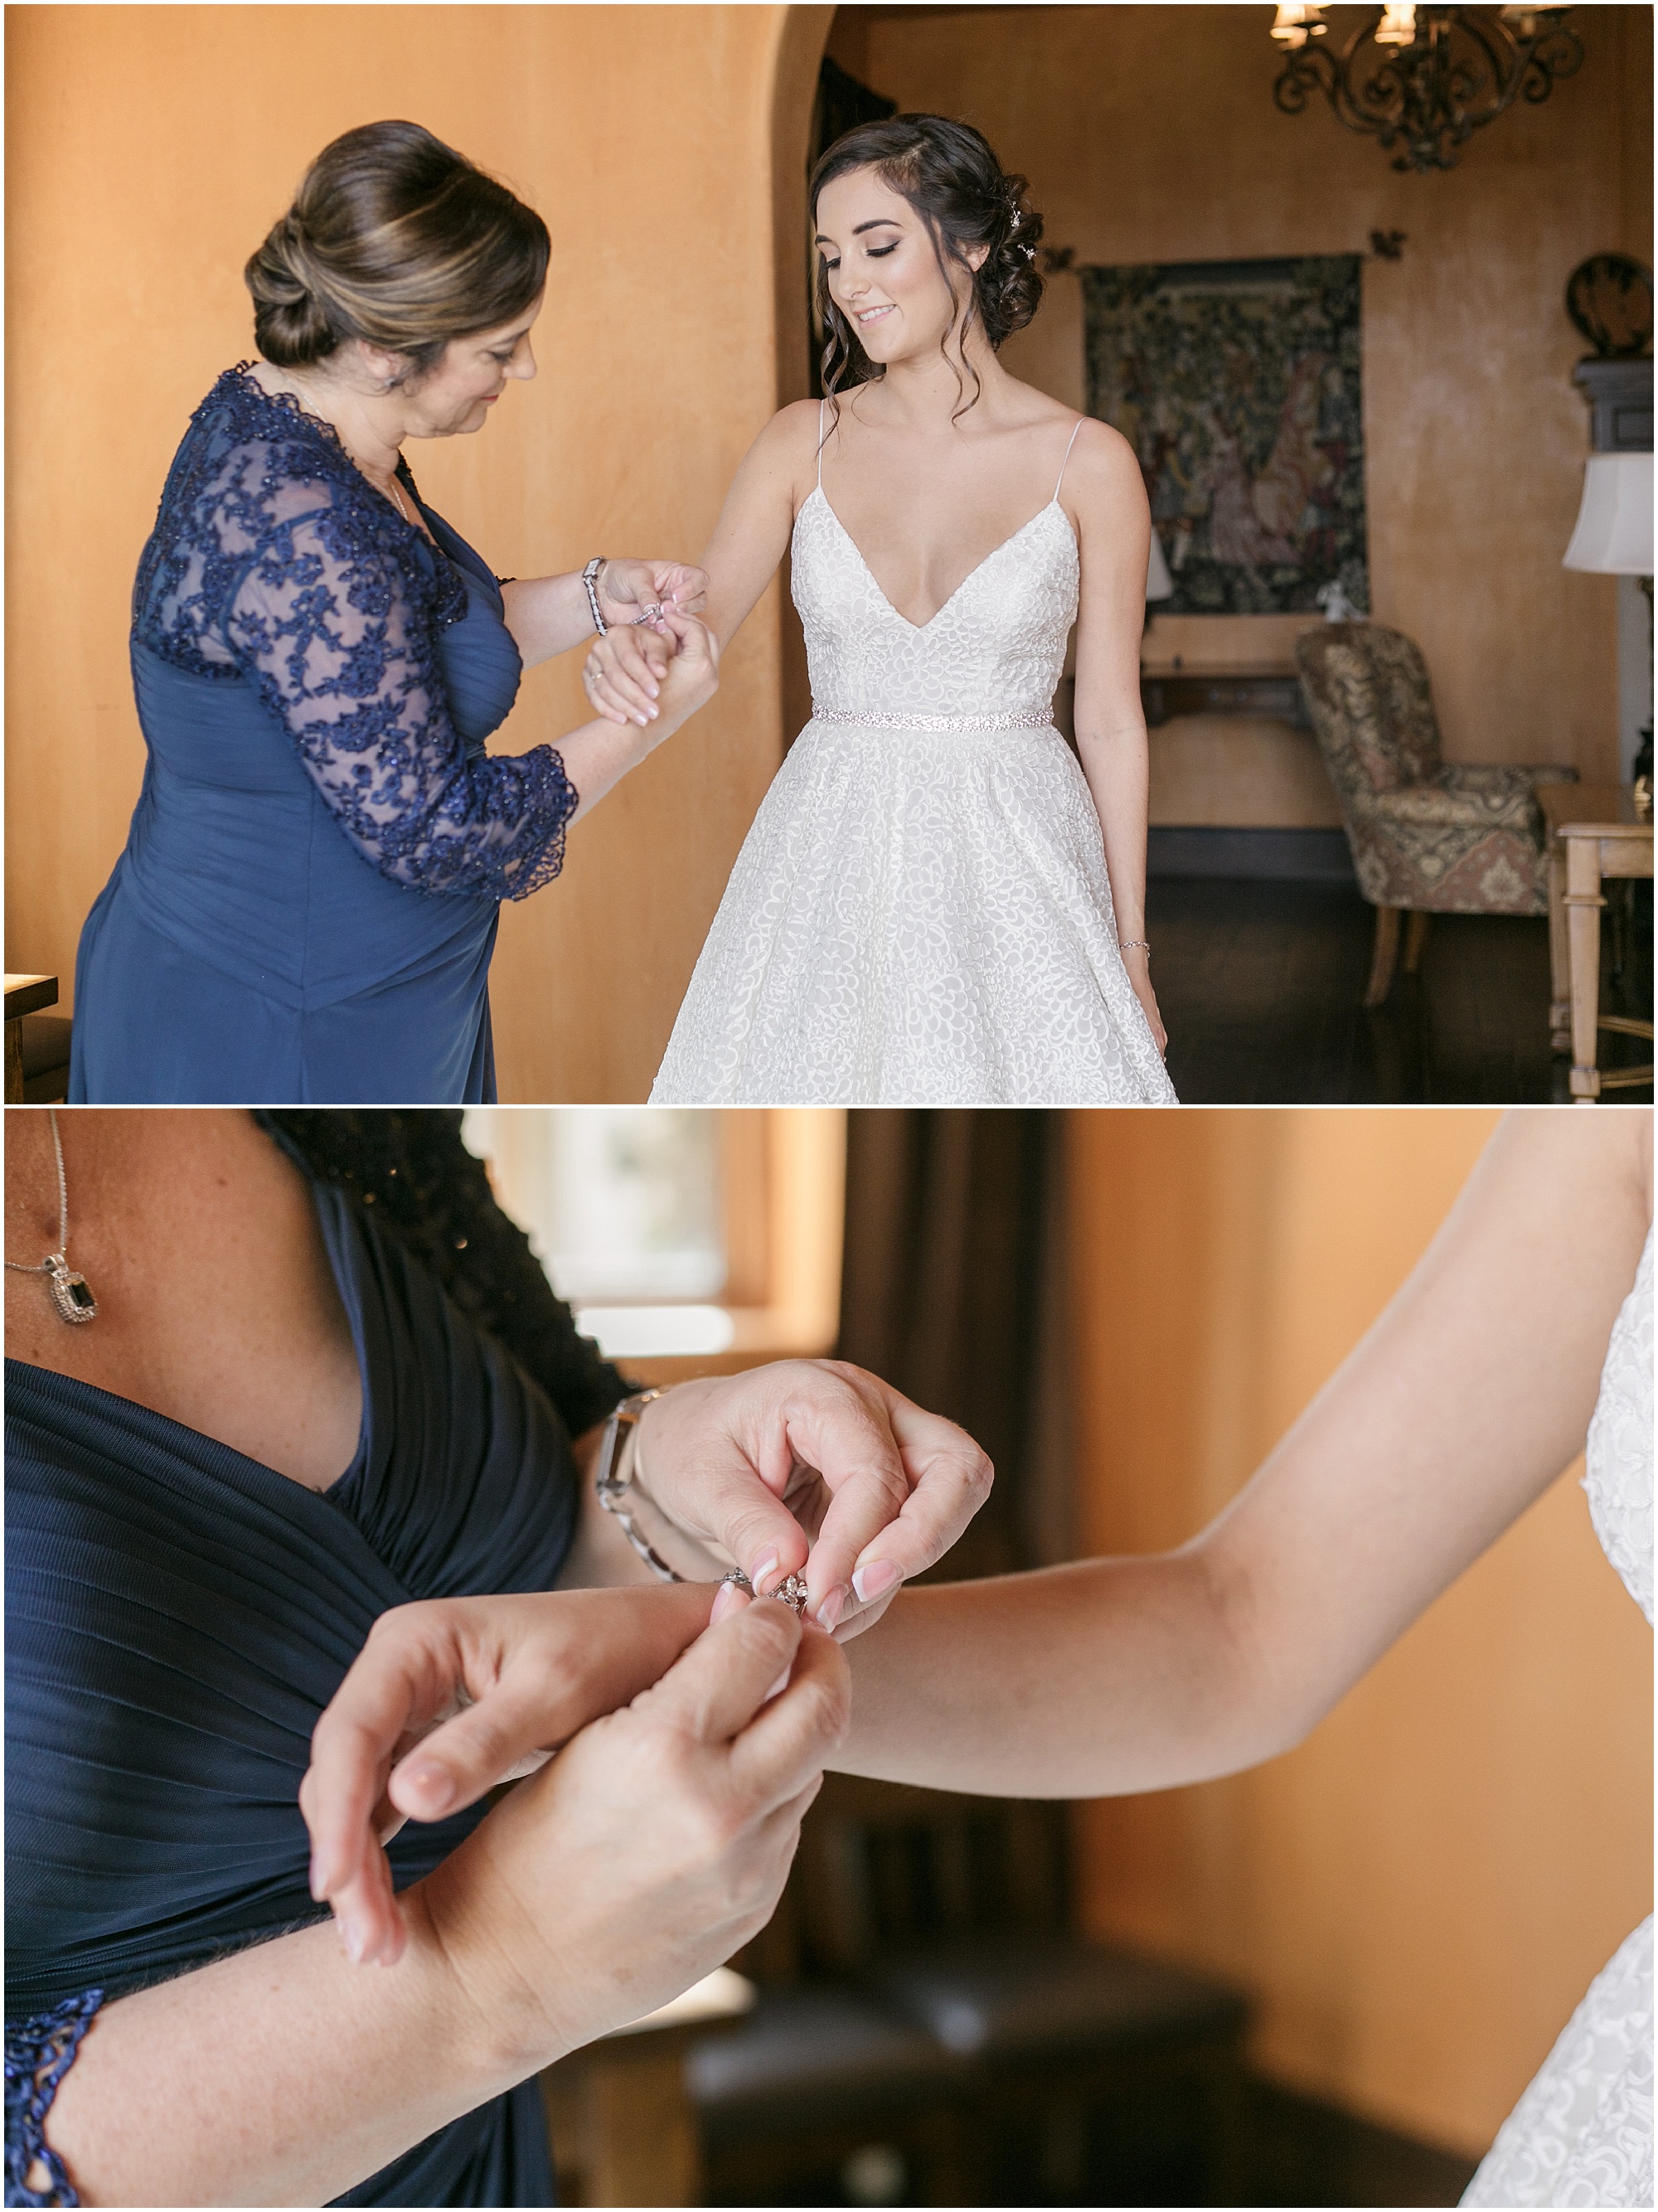 Mother of the bride putting a bracelet on her daughter.